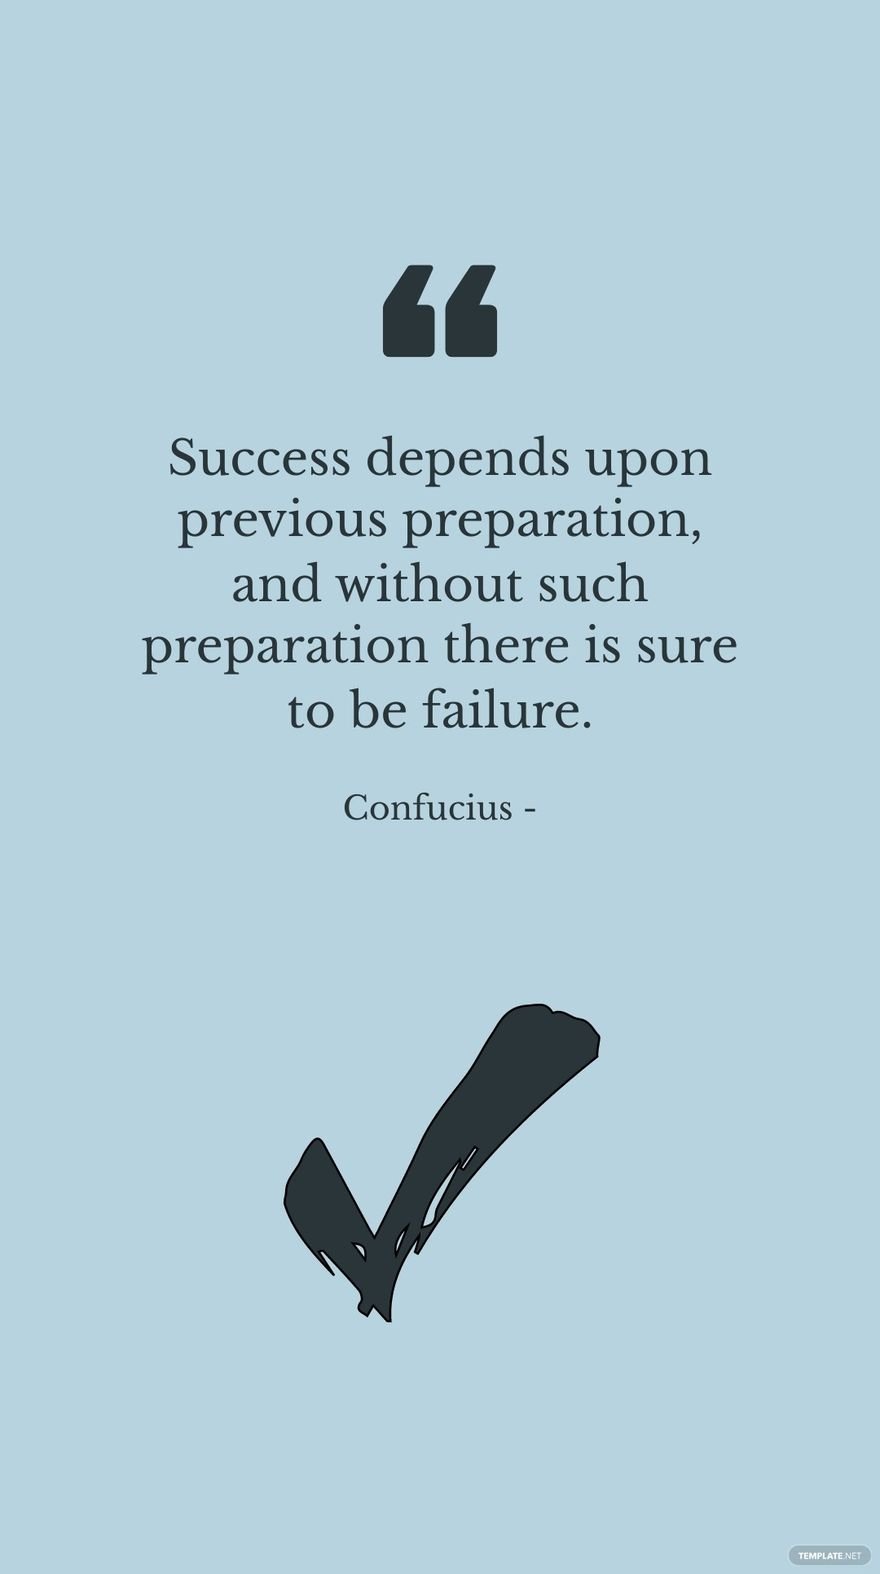 Free Confucius - Success depends upon previous preparation, and without such preparation there is sure to be failure. in JPG